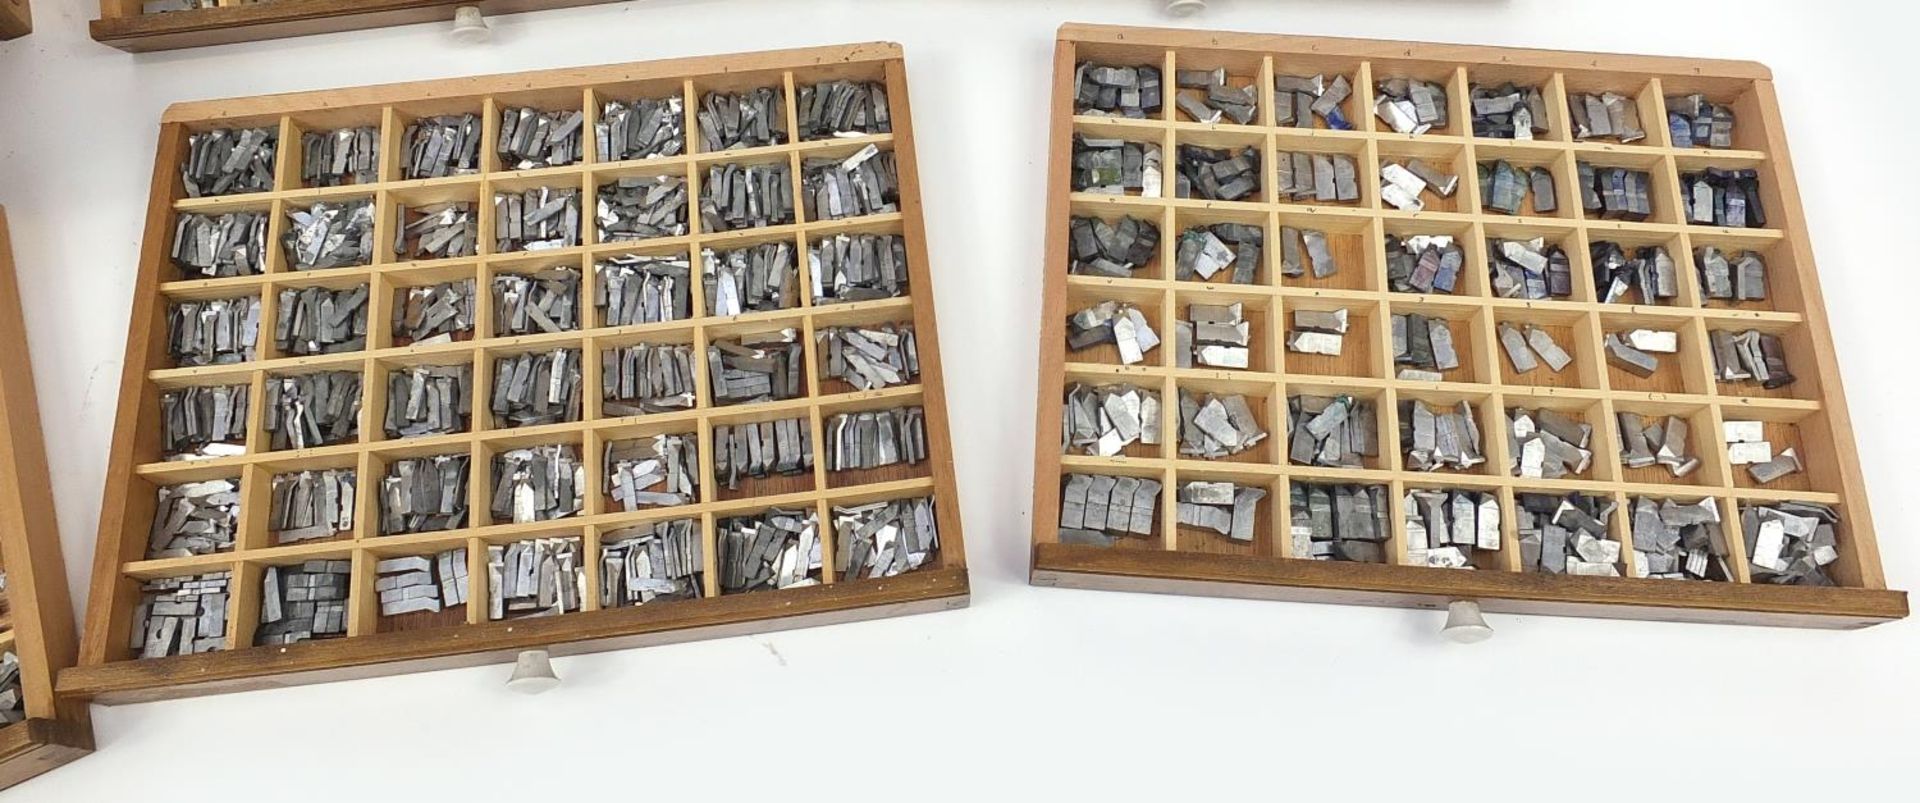 Large collection of metal printer's blocks letterpresses arranged in a six drawer table top cabinet - Image 4 of 6